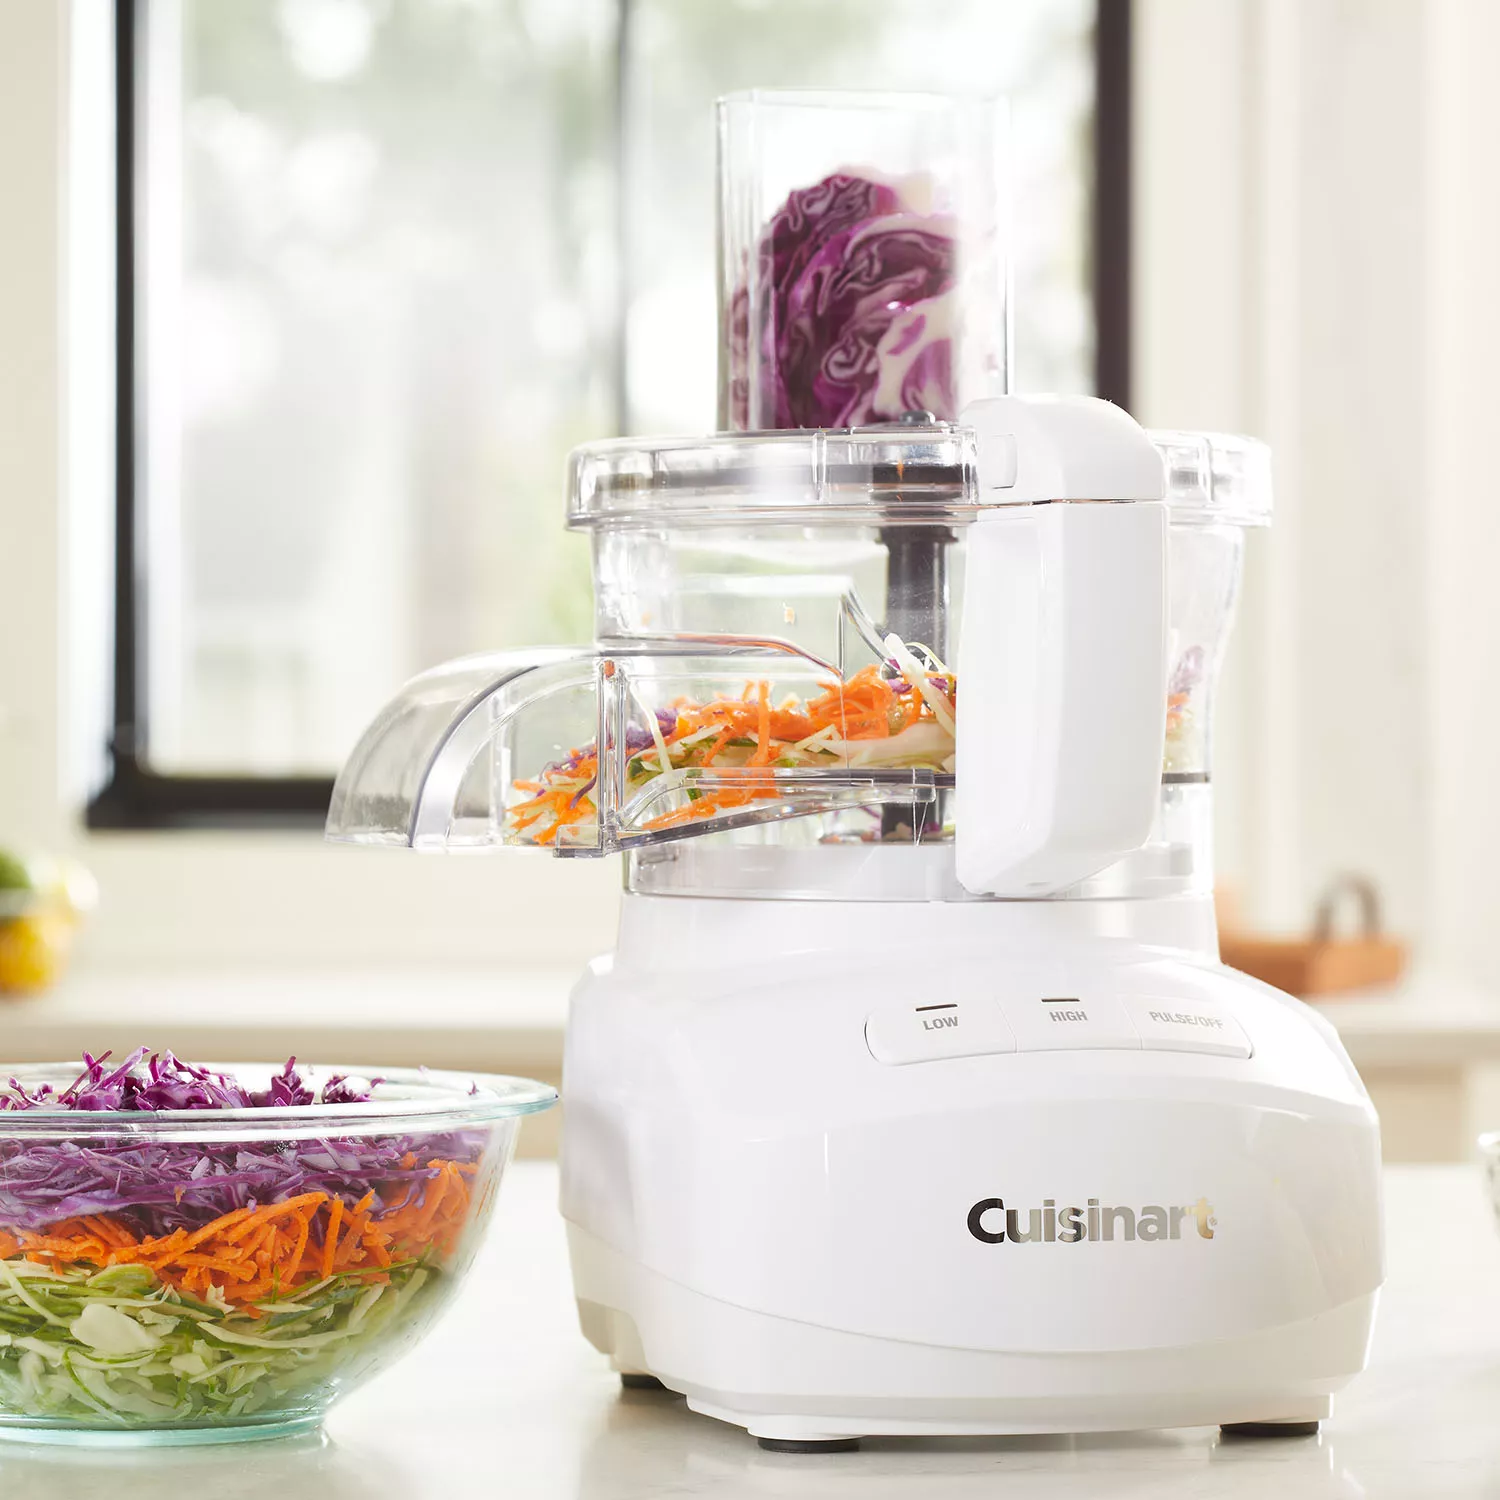 September Giveaway: Cuisinart 9-Cup Food Processor — $270 Value {closed} -  Up and Alive